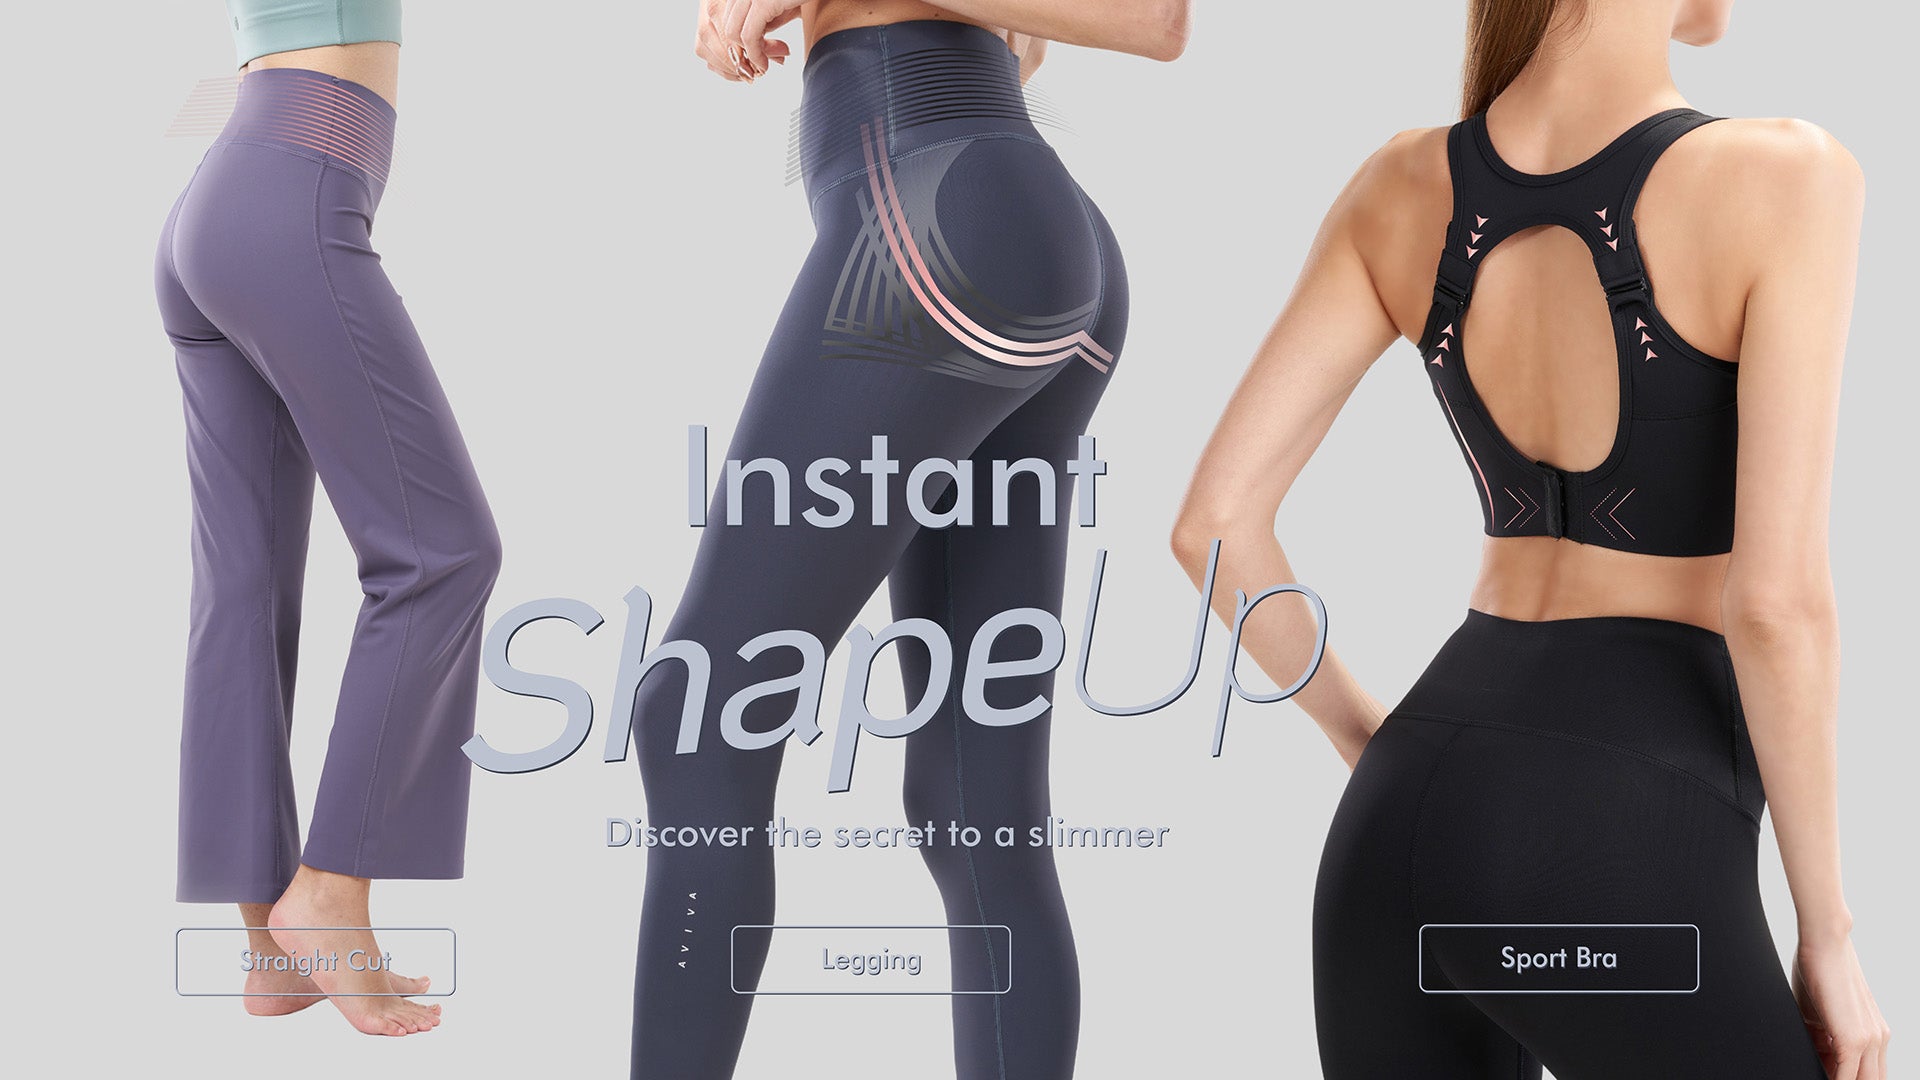 Have you ever bought a new set of workout clothes, only to leave them untouched in your closet? It's not uncommon. Many people stop wearing their gym clothes for a variety of reasons, such as body size changes or lack of confidence in public.  We thought, what if we could create sportswear that makes you feel confident instantly no matter your shape or size changes? Wouldn't that be amazing?